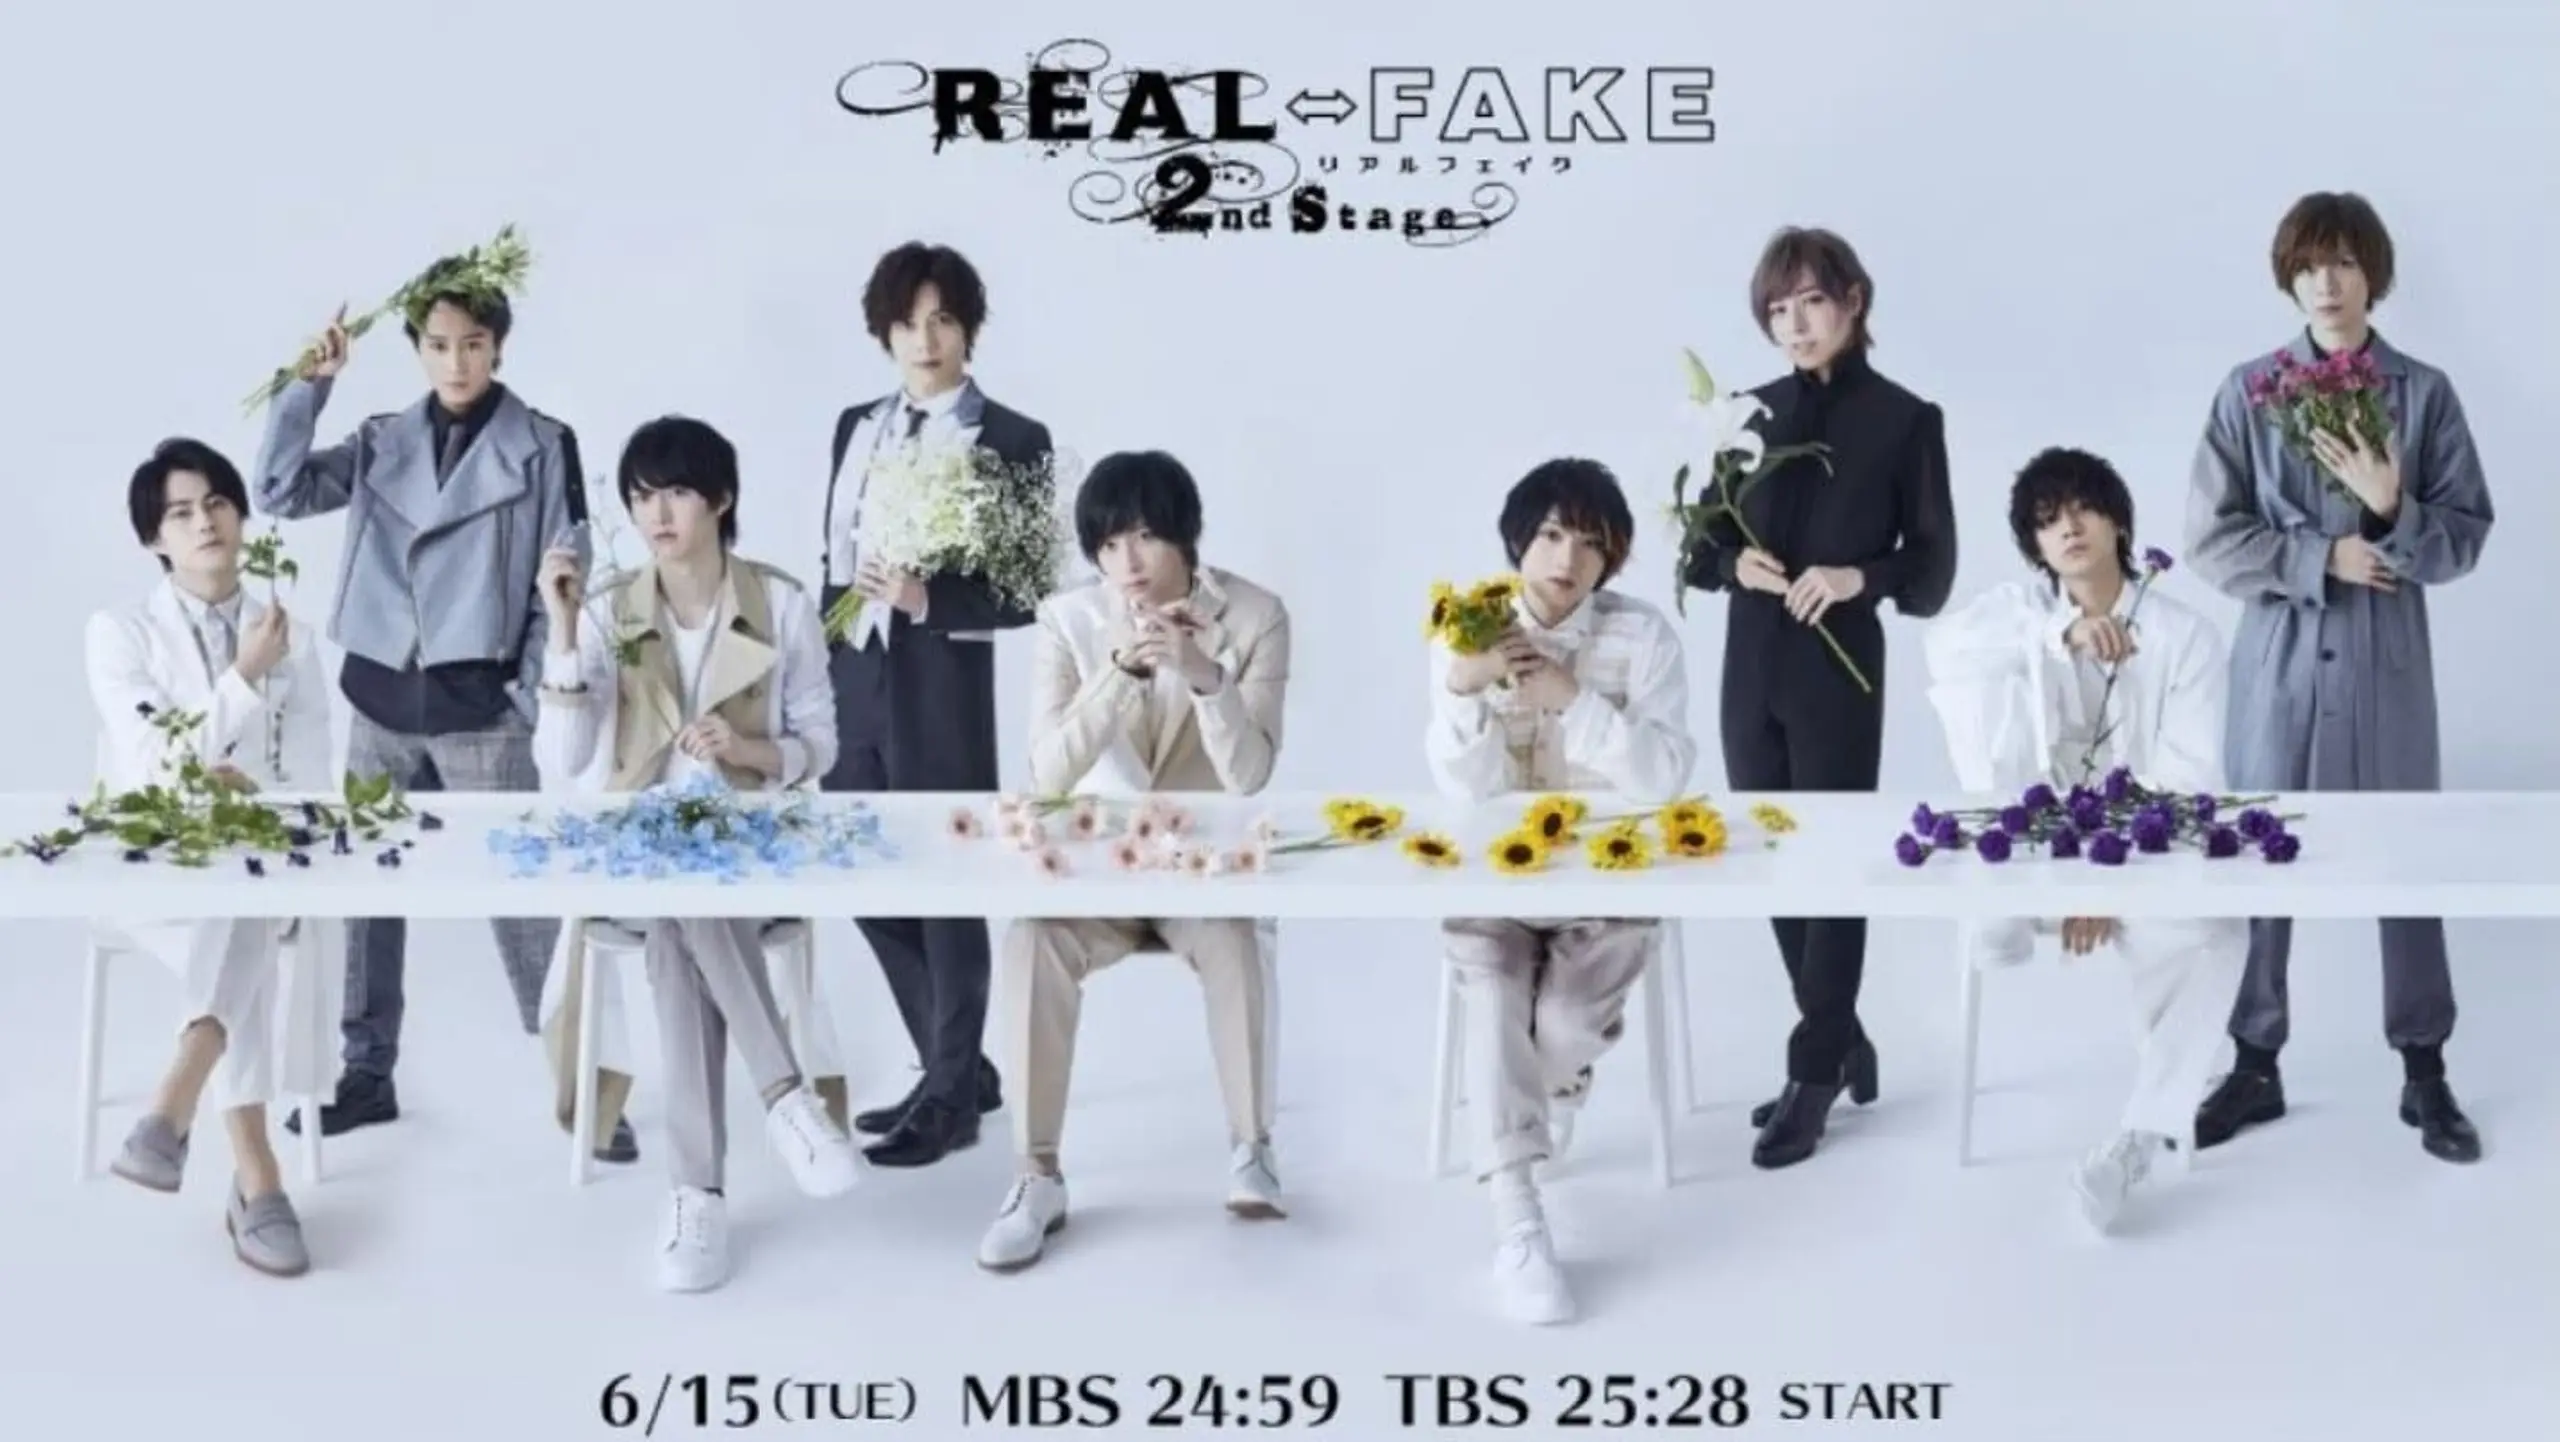 REAL⇔FAKE 2nd Stage